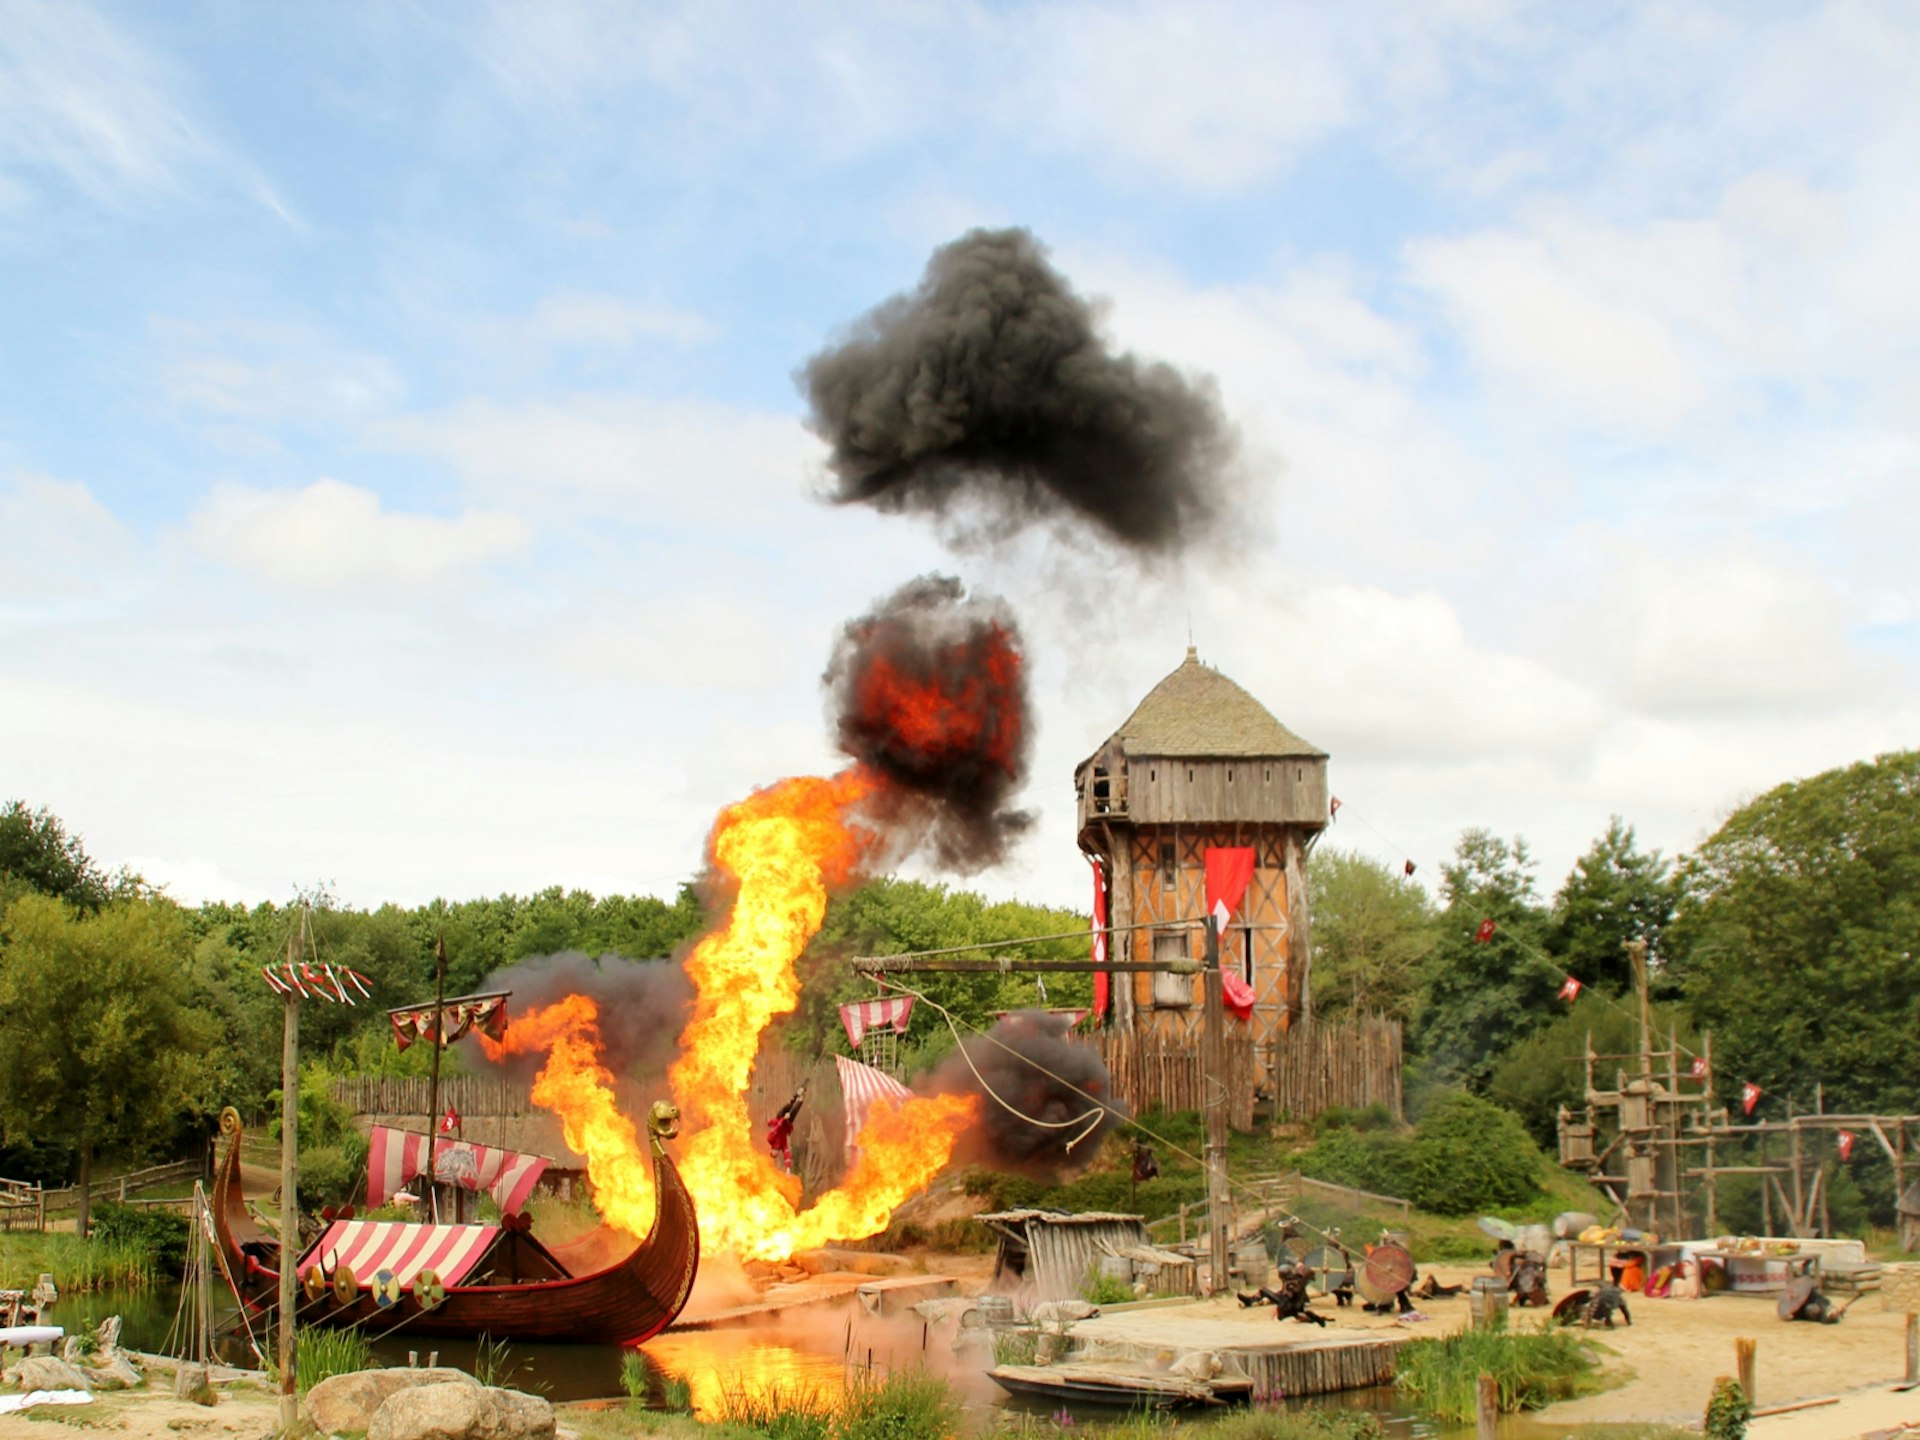 Disney alternatives - A viking re-enactment show at Puy du Fou shows a viking boat bursting into flames next to a wooden tower 